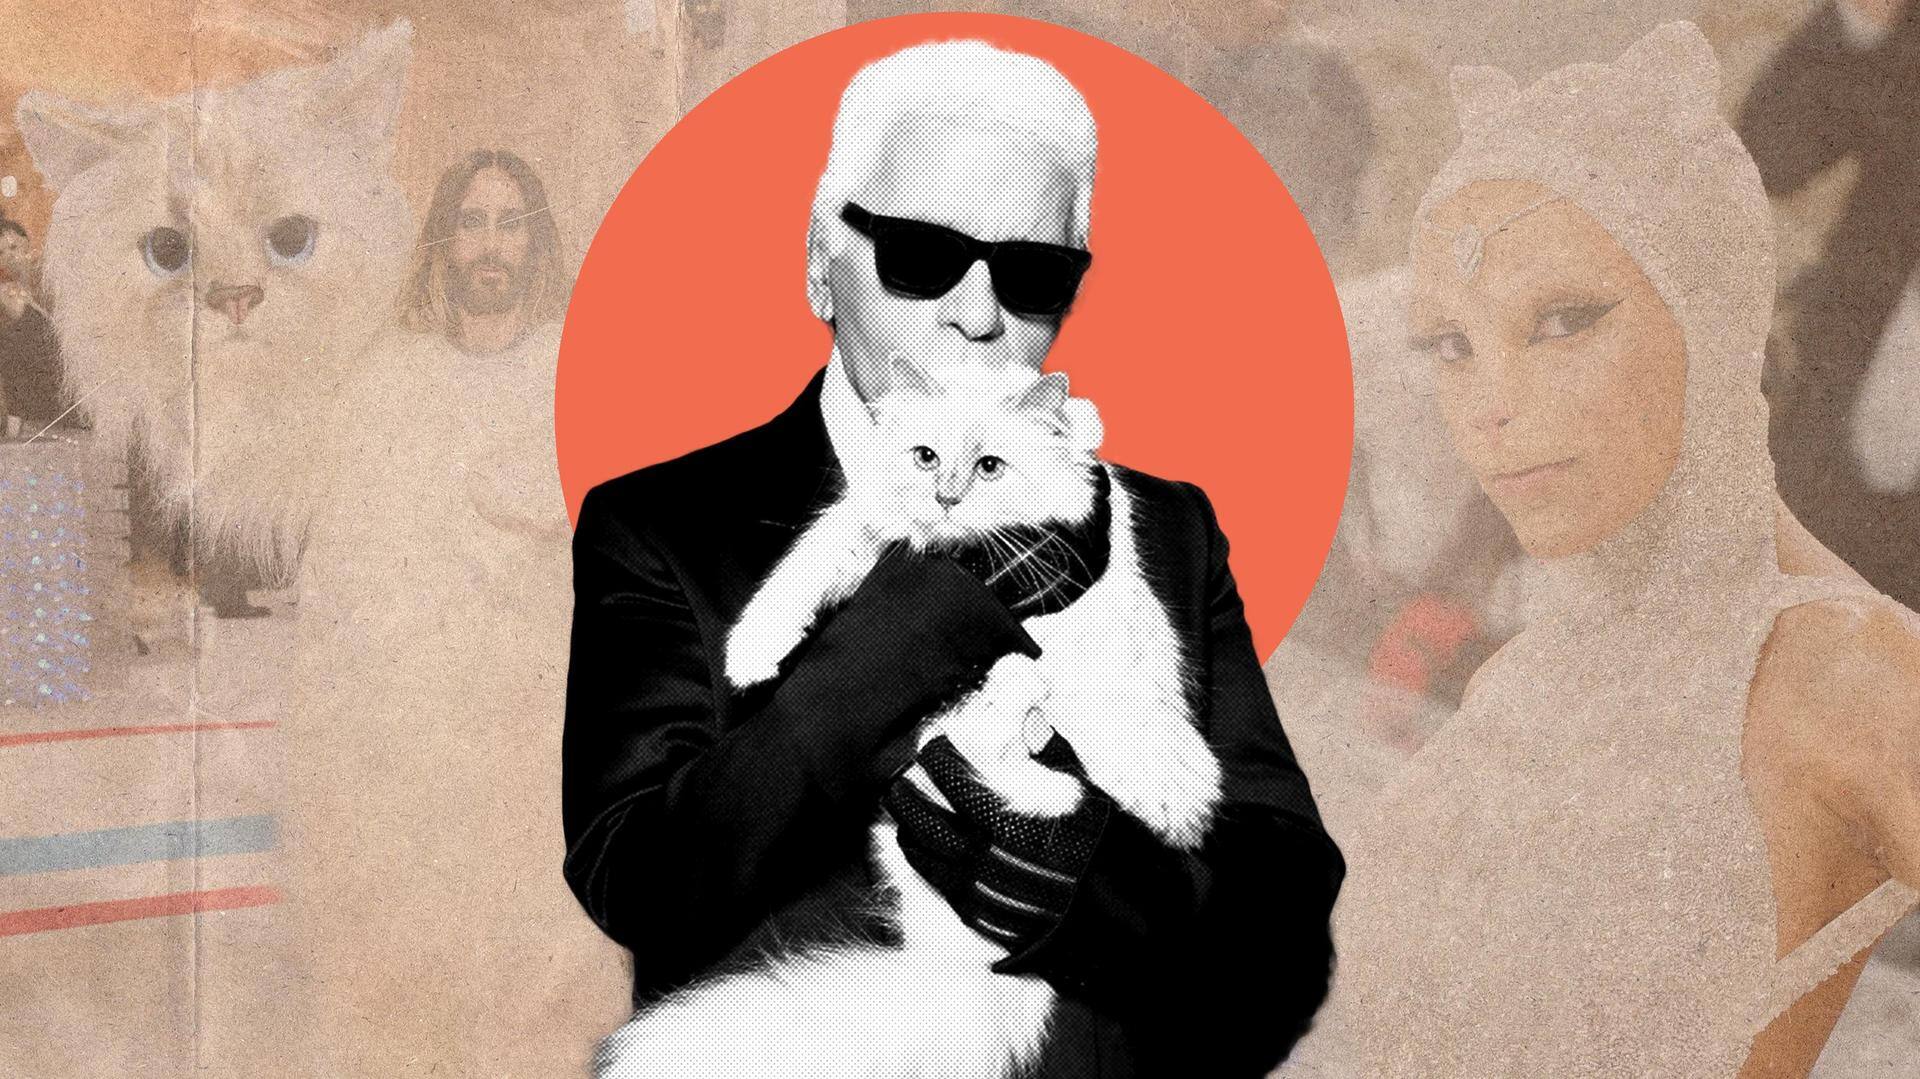 #MetGala2023: Why Lagerfeld's cat Choupette is ruling the red carpet